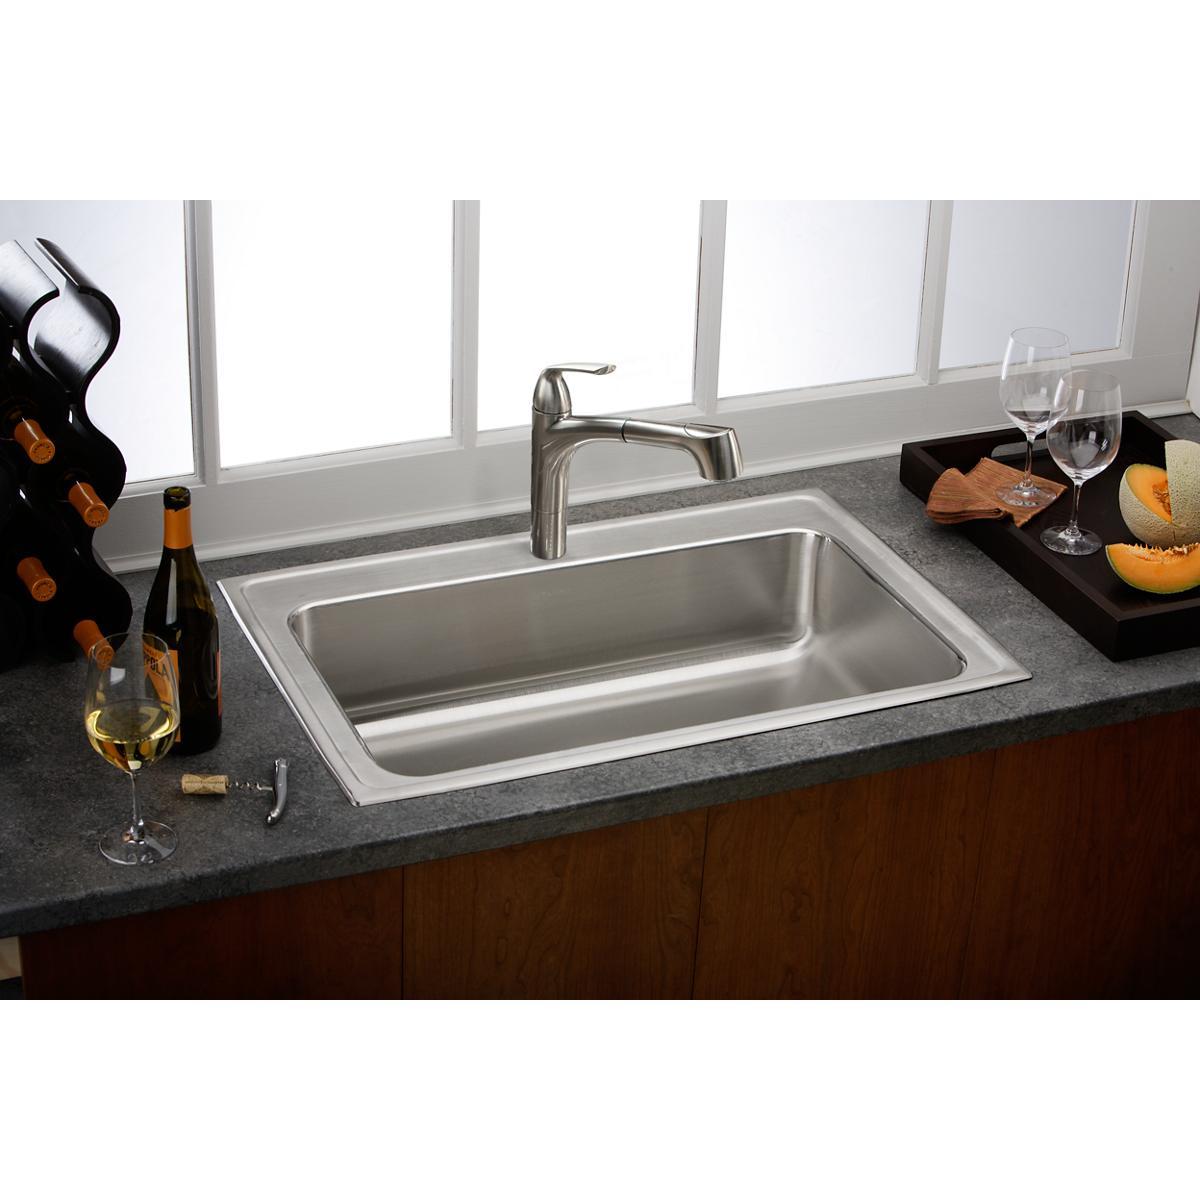 Elkay Gourmet Single Hole Kitchen Faucet Pull-out Spray and Lever Handle with Hi and Mid-rise Base Options-DirectSinks